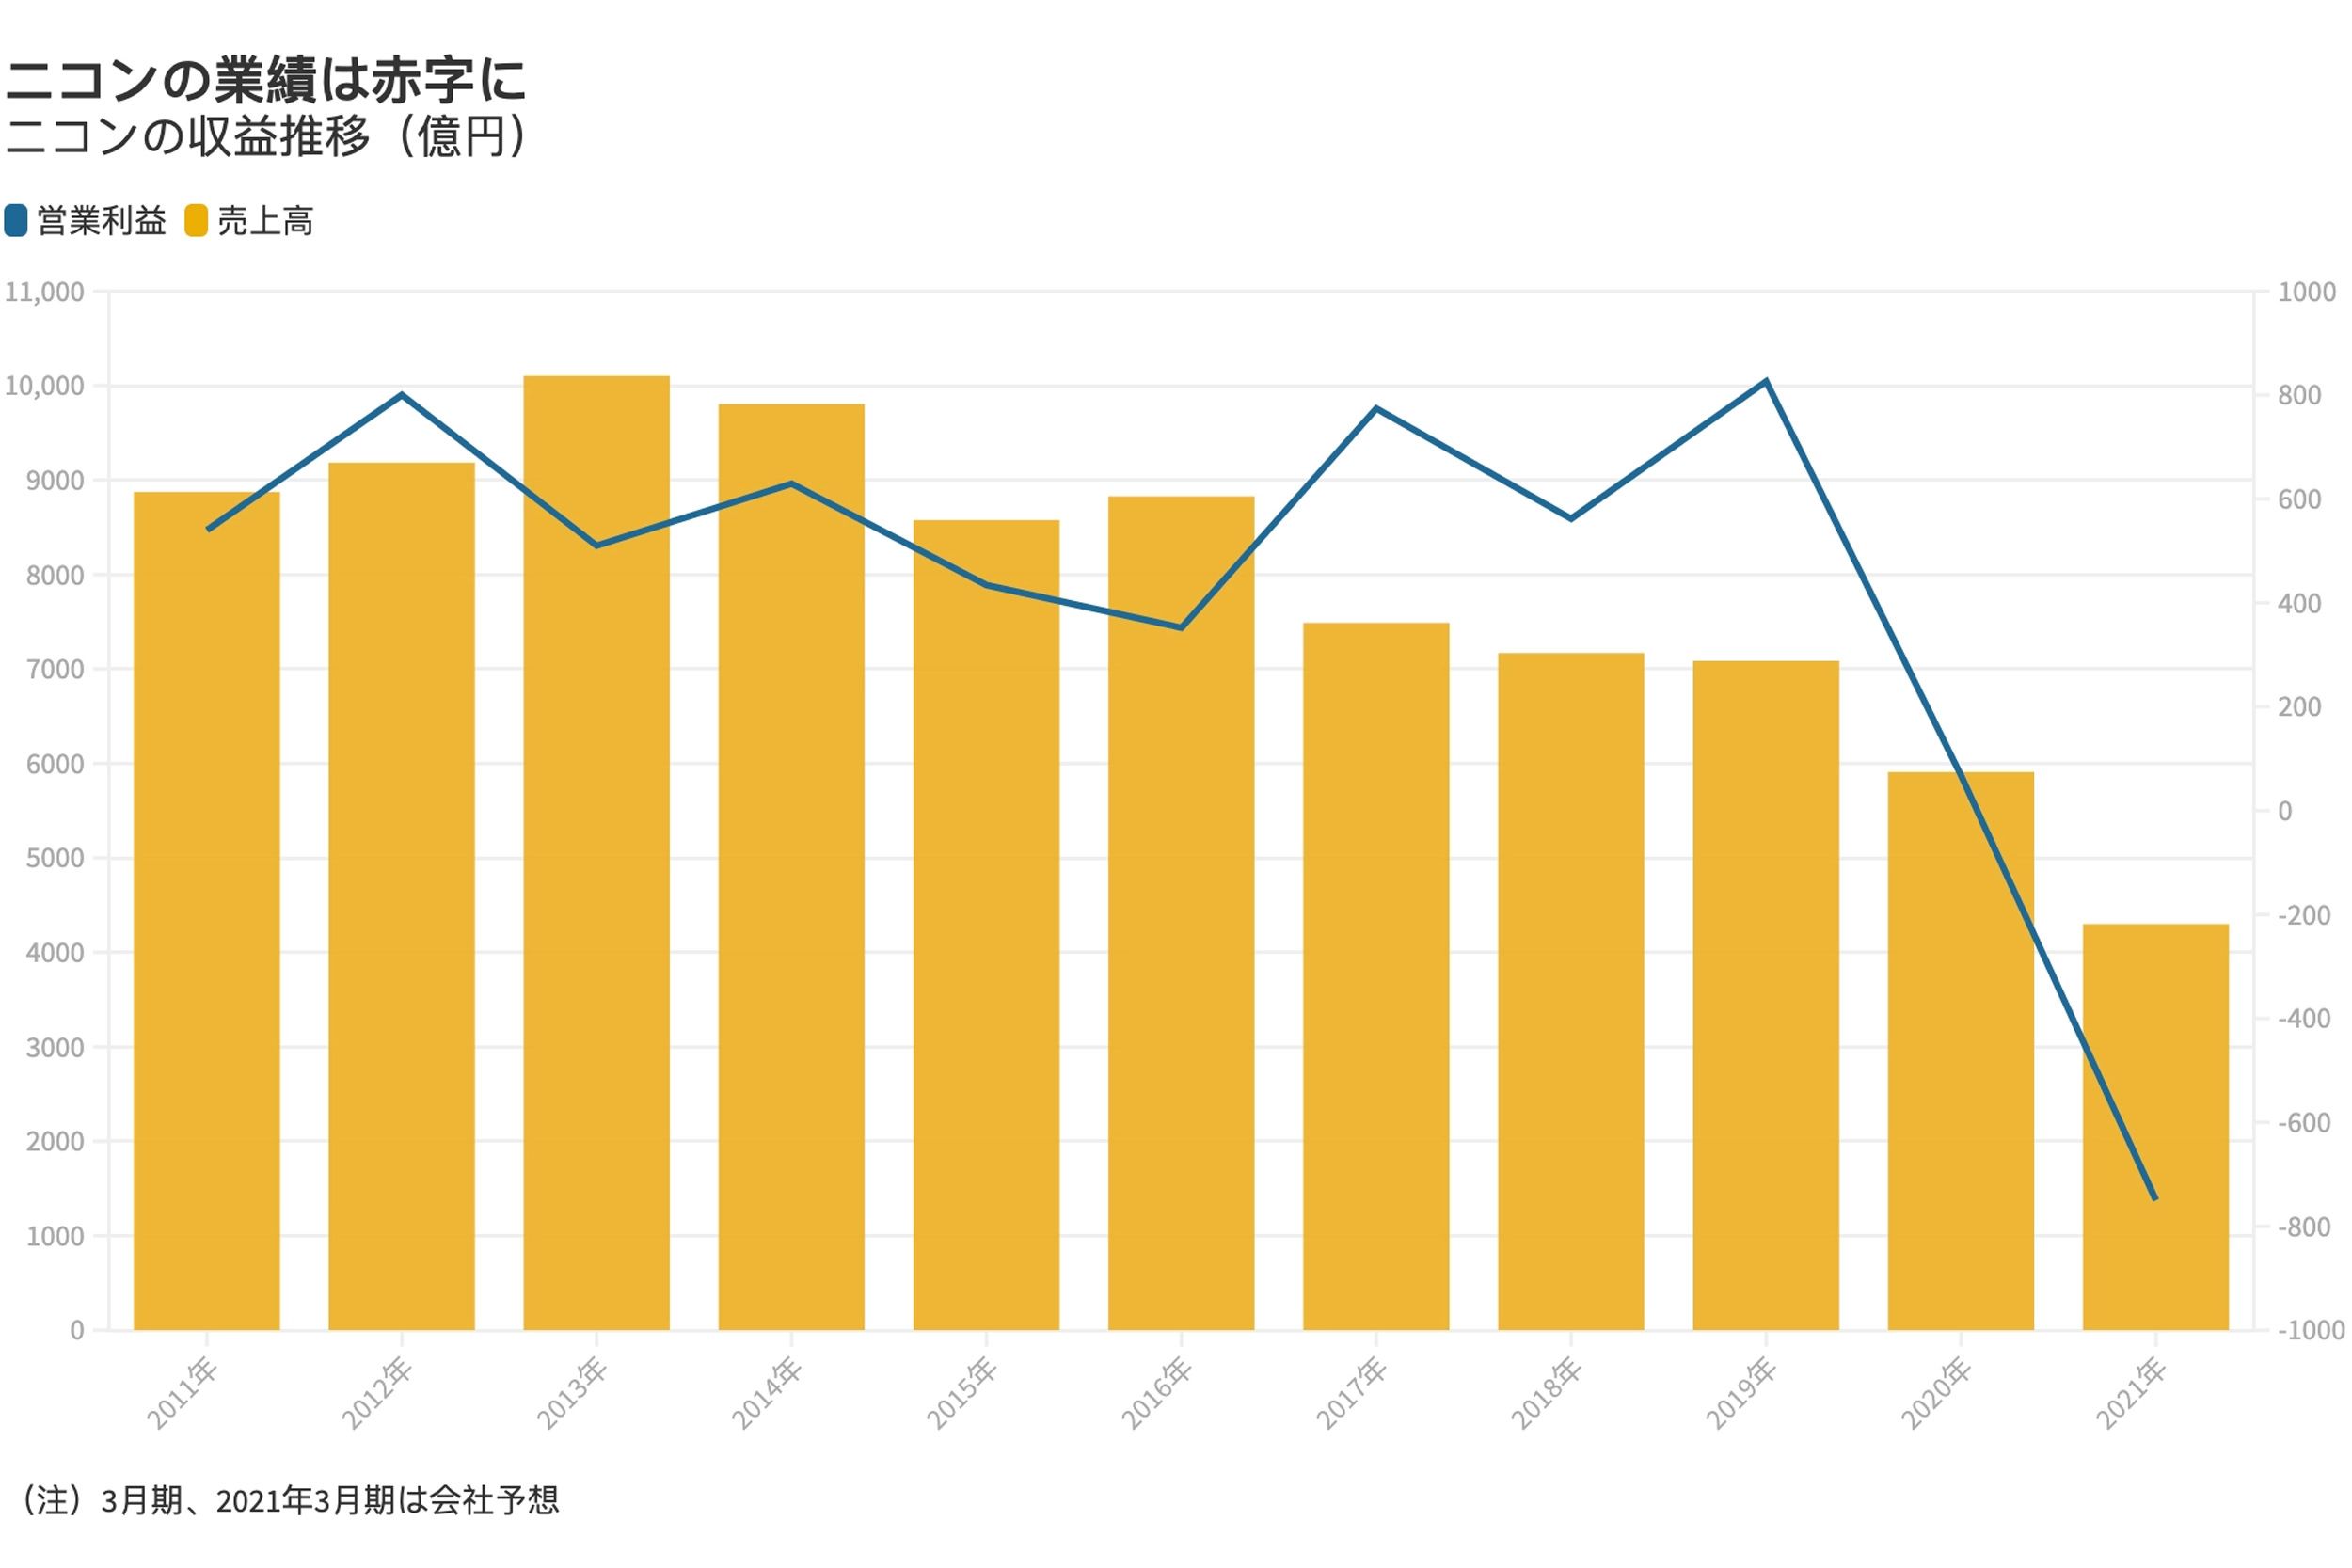 Nikon / Nikon financial performance chart and sales statistics of the company's products in recent years